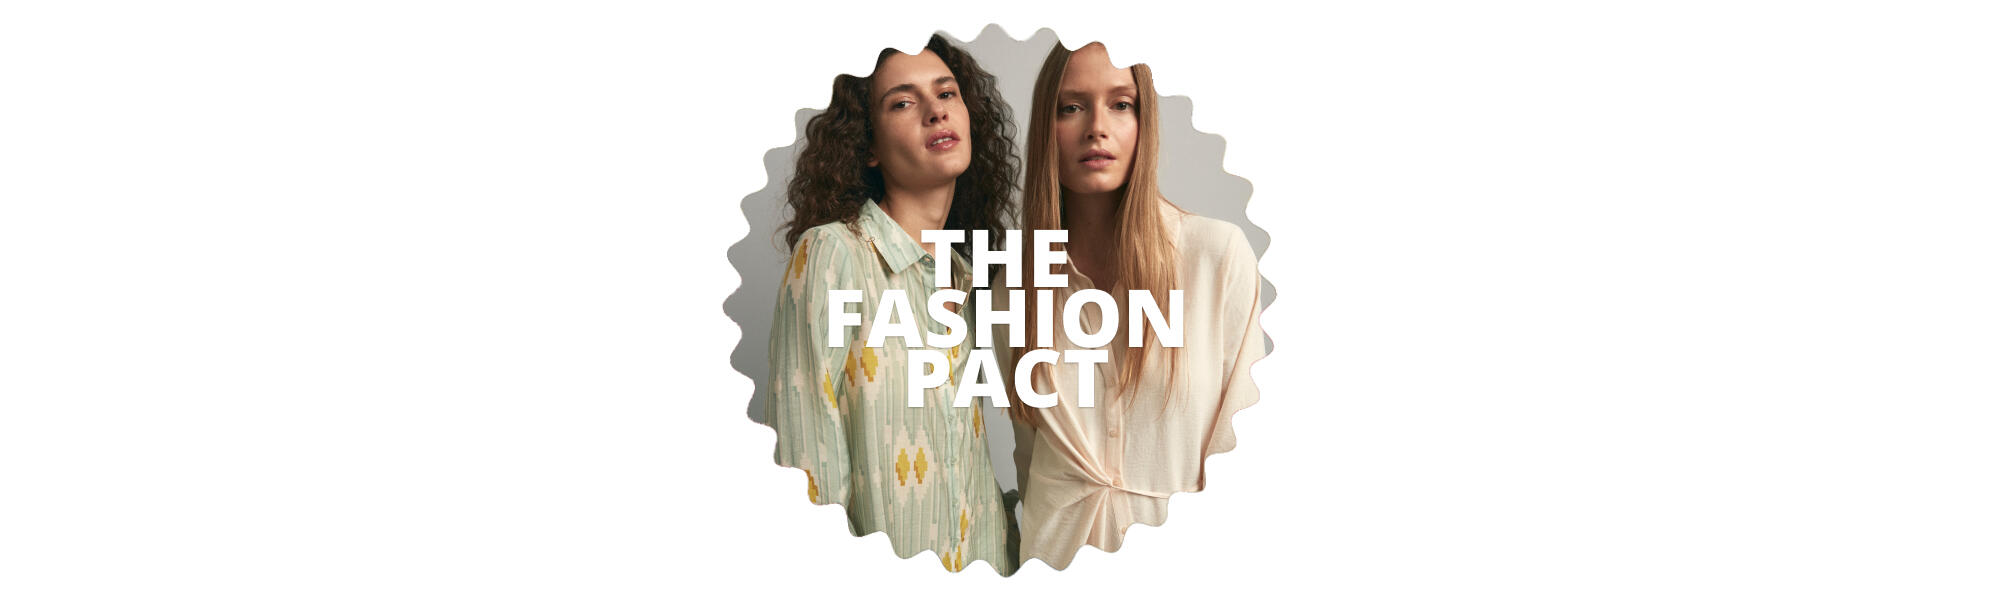 THE FASHION PACT